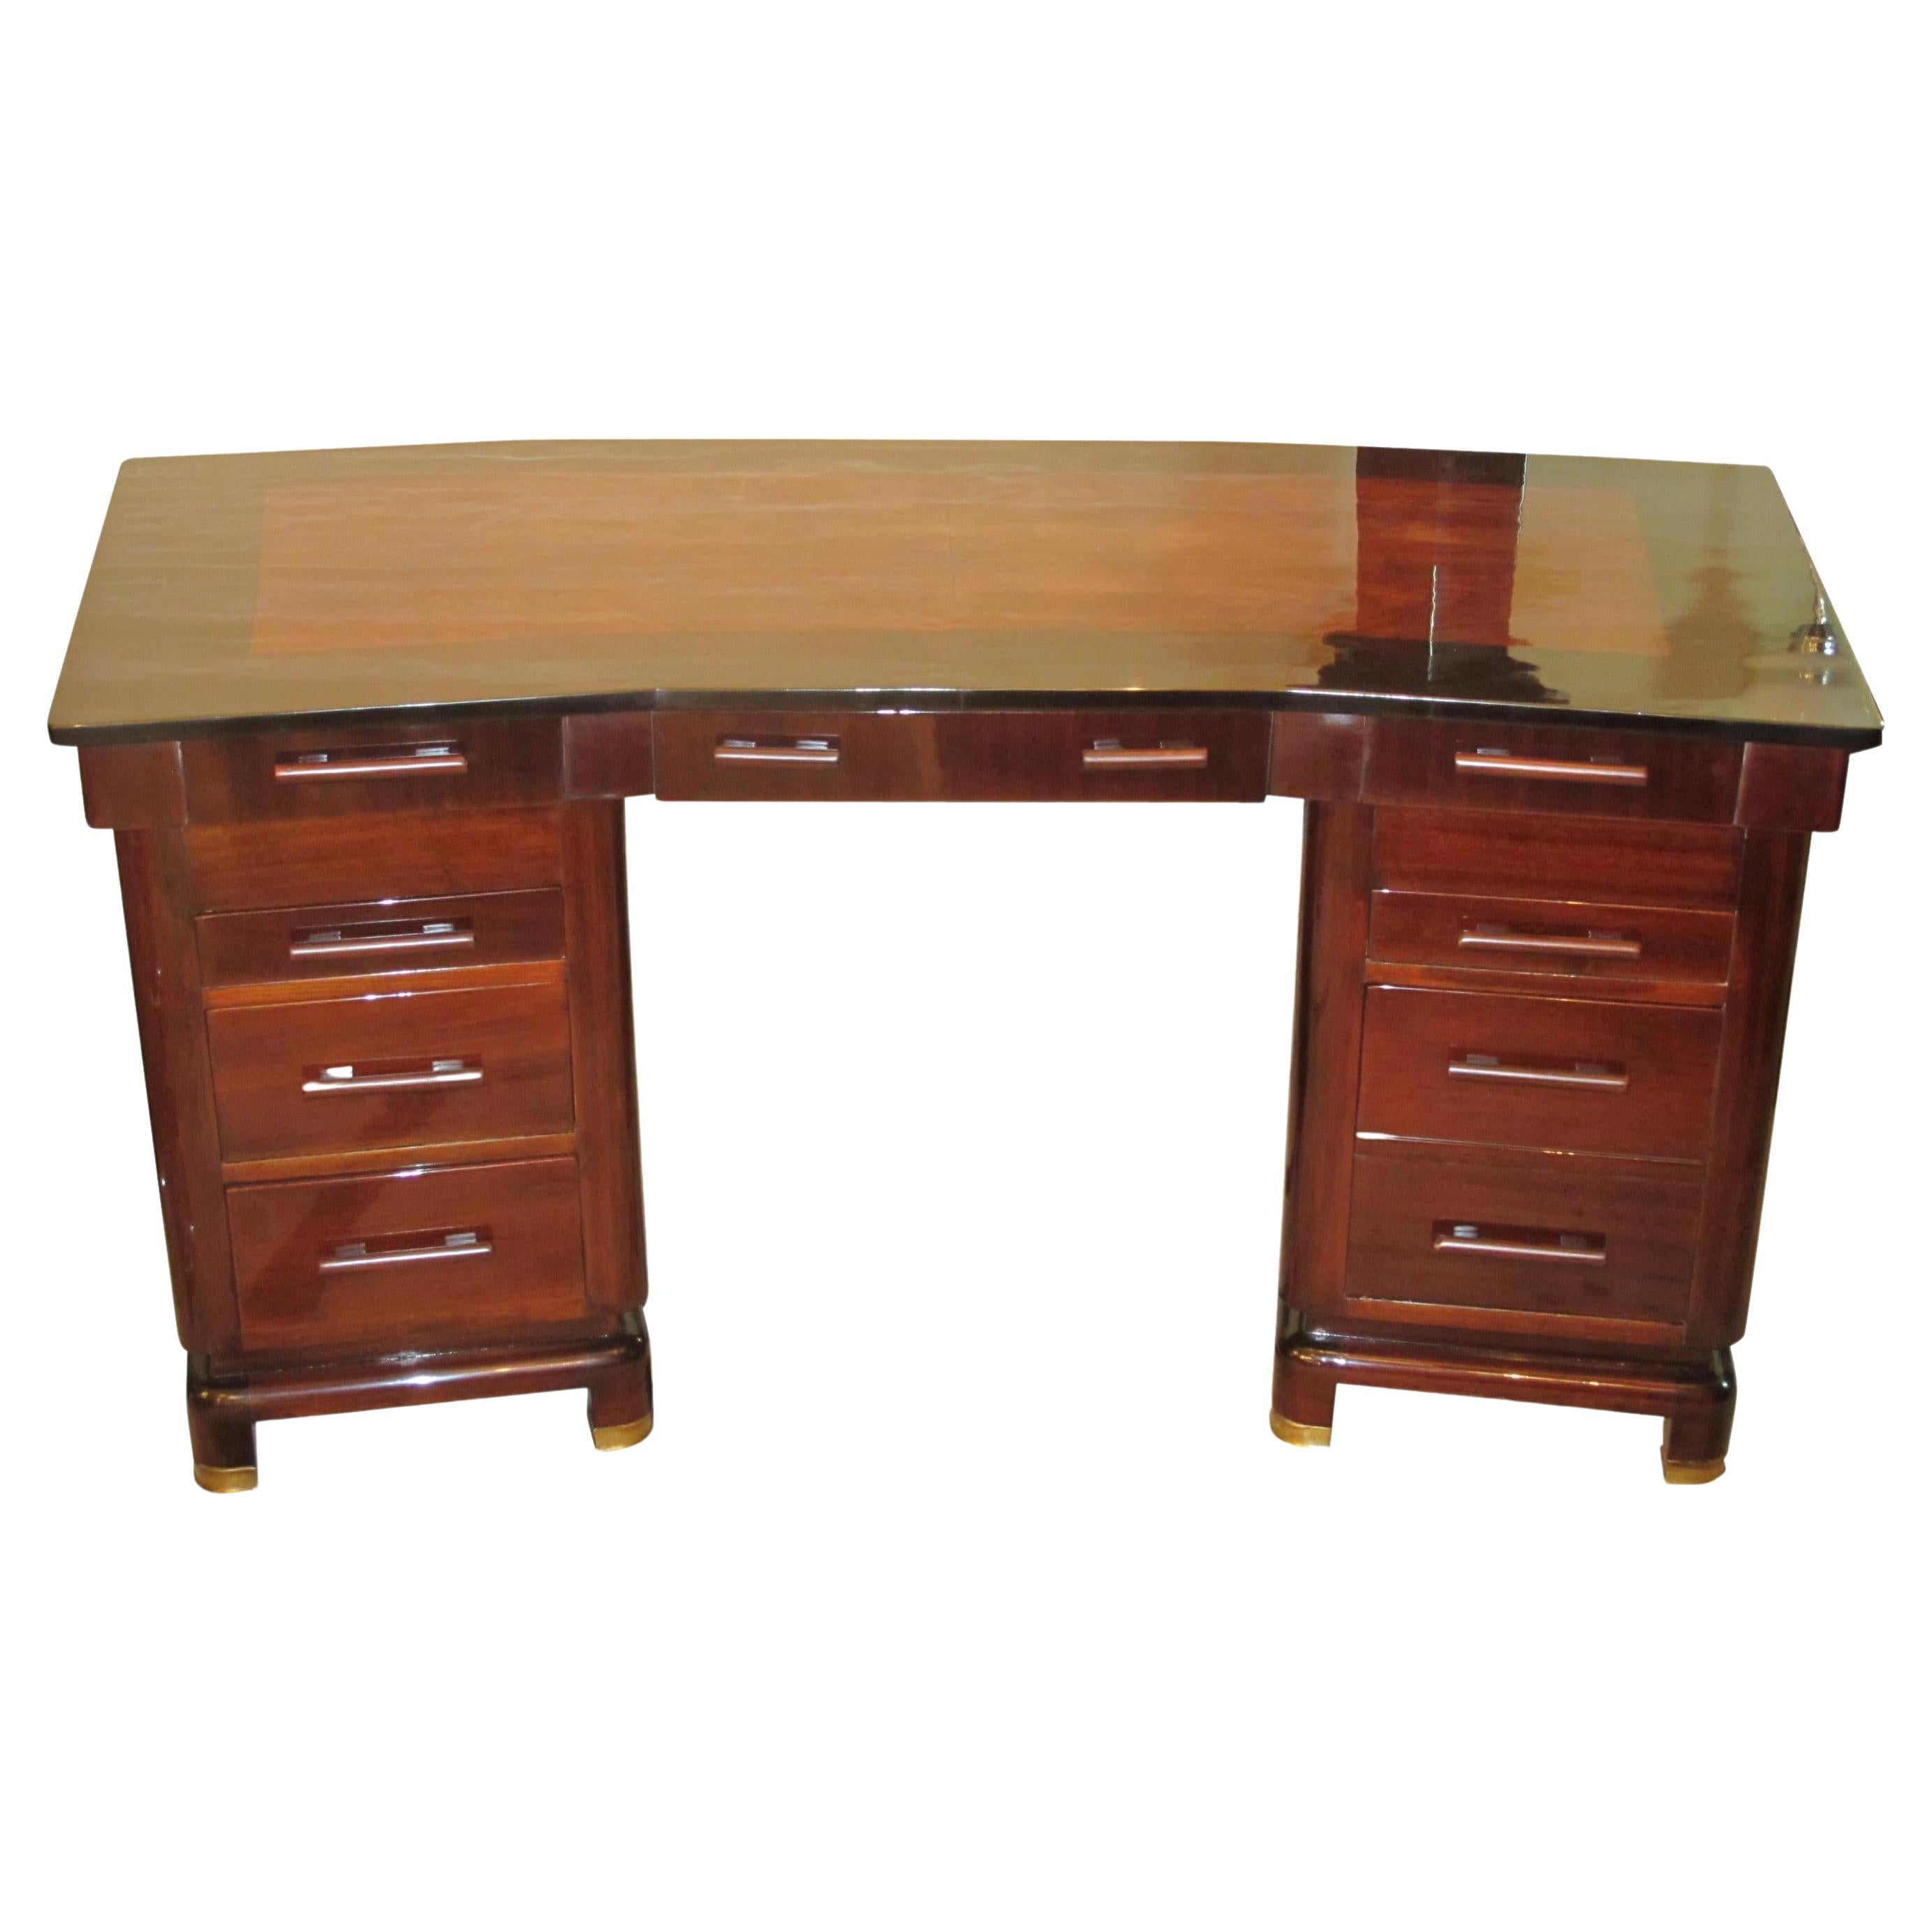 Desk Art Deco in Wood from France 1930 " Free Shipping in Florida "